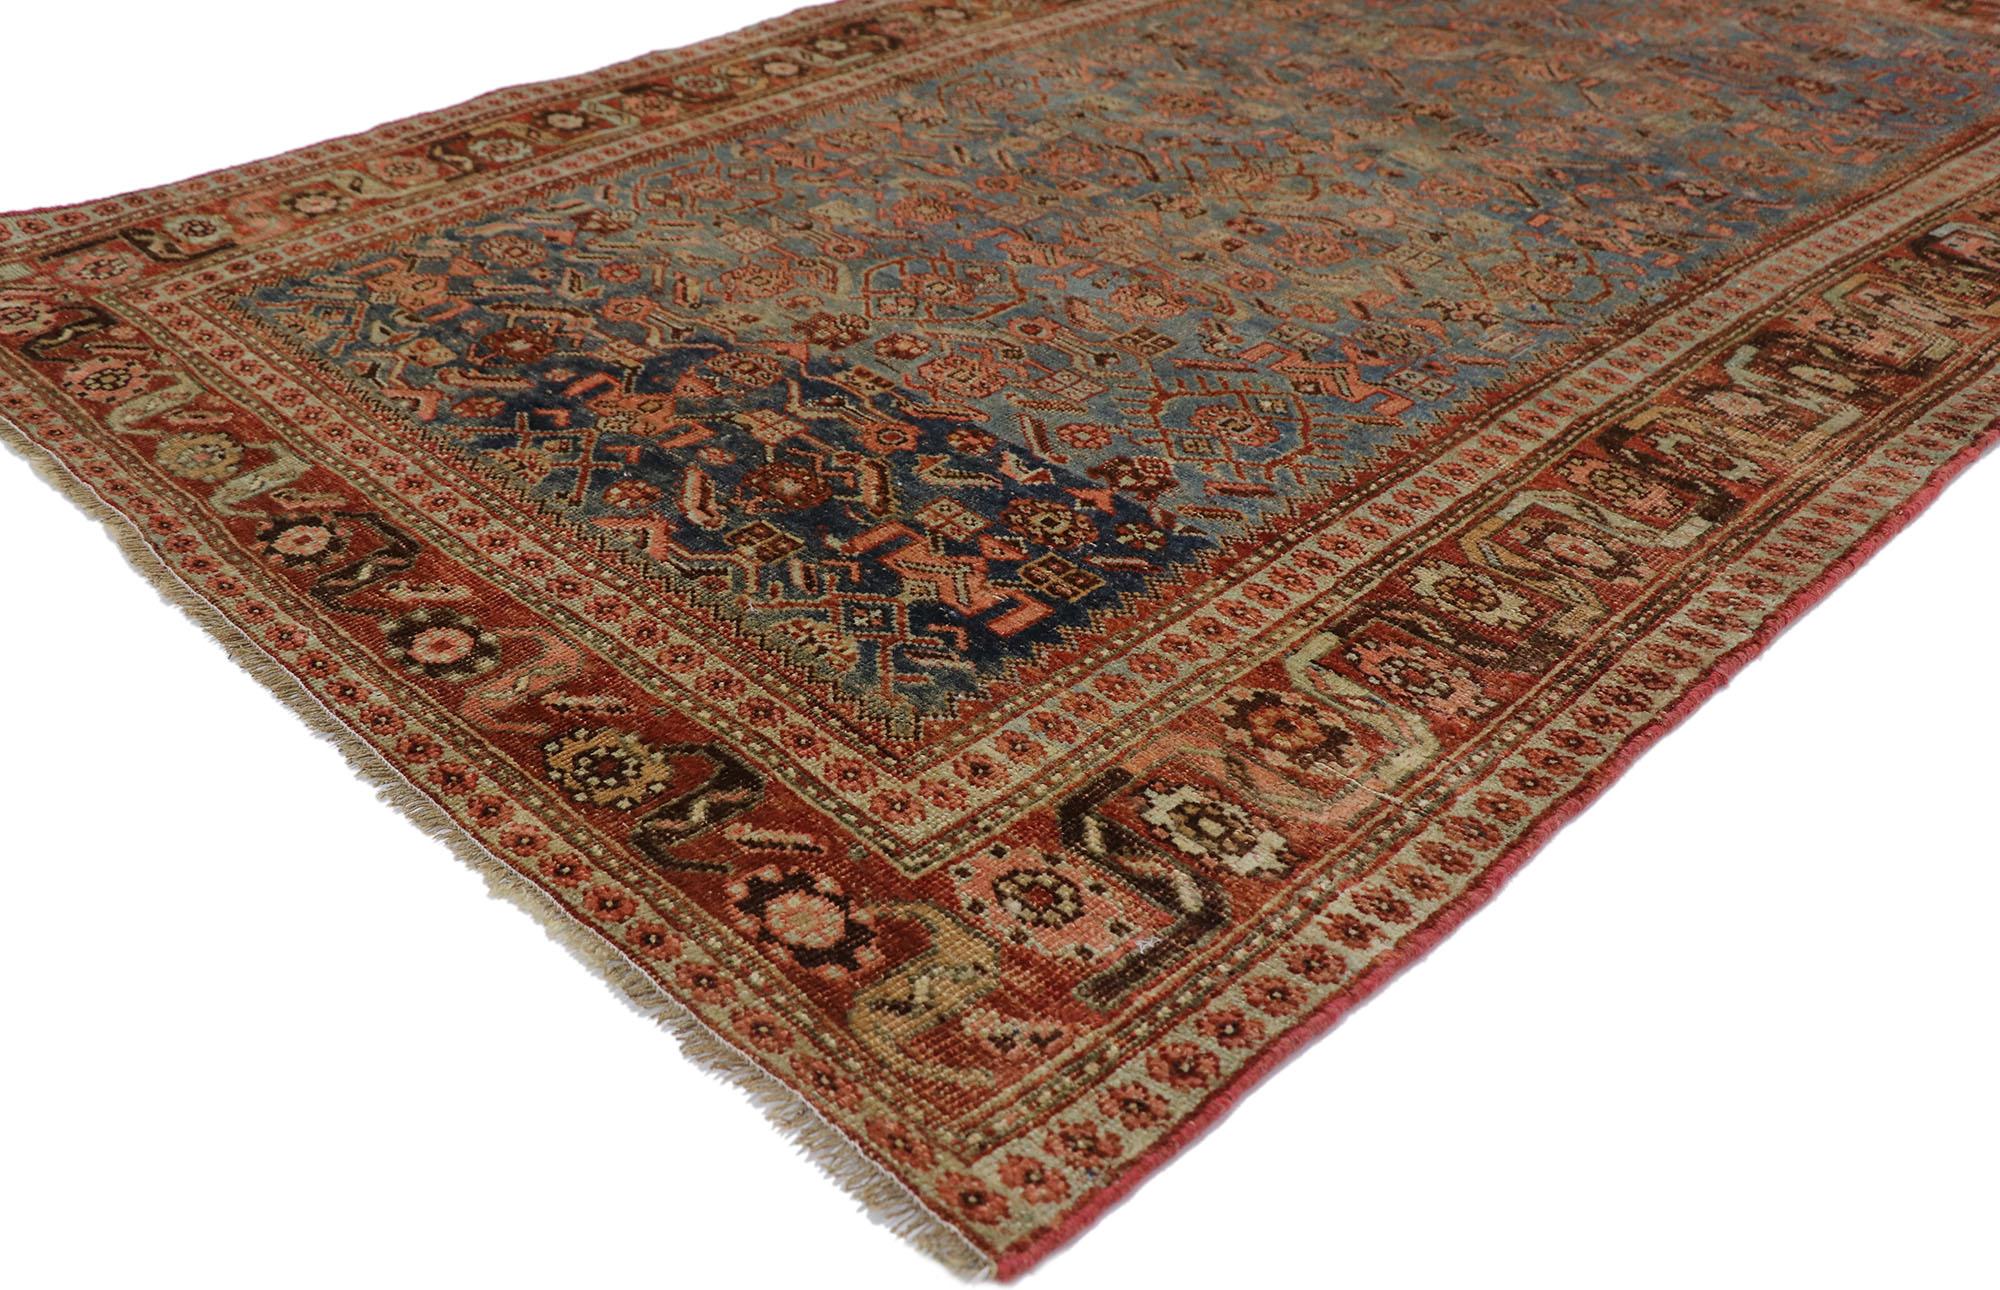 60926 Antique Persian Bijar rug with Modern style. Measures: 04'04 x 06'10. With its effortless beauty and rustic sensibility, this hand knotted wool antique Persian Bijar rug will take on a curated lived-in look that feels timeless while imparting